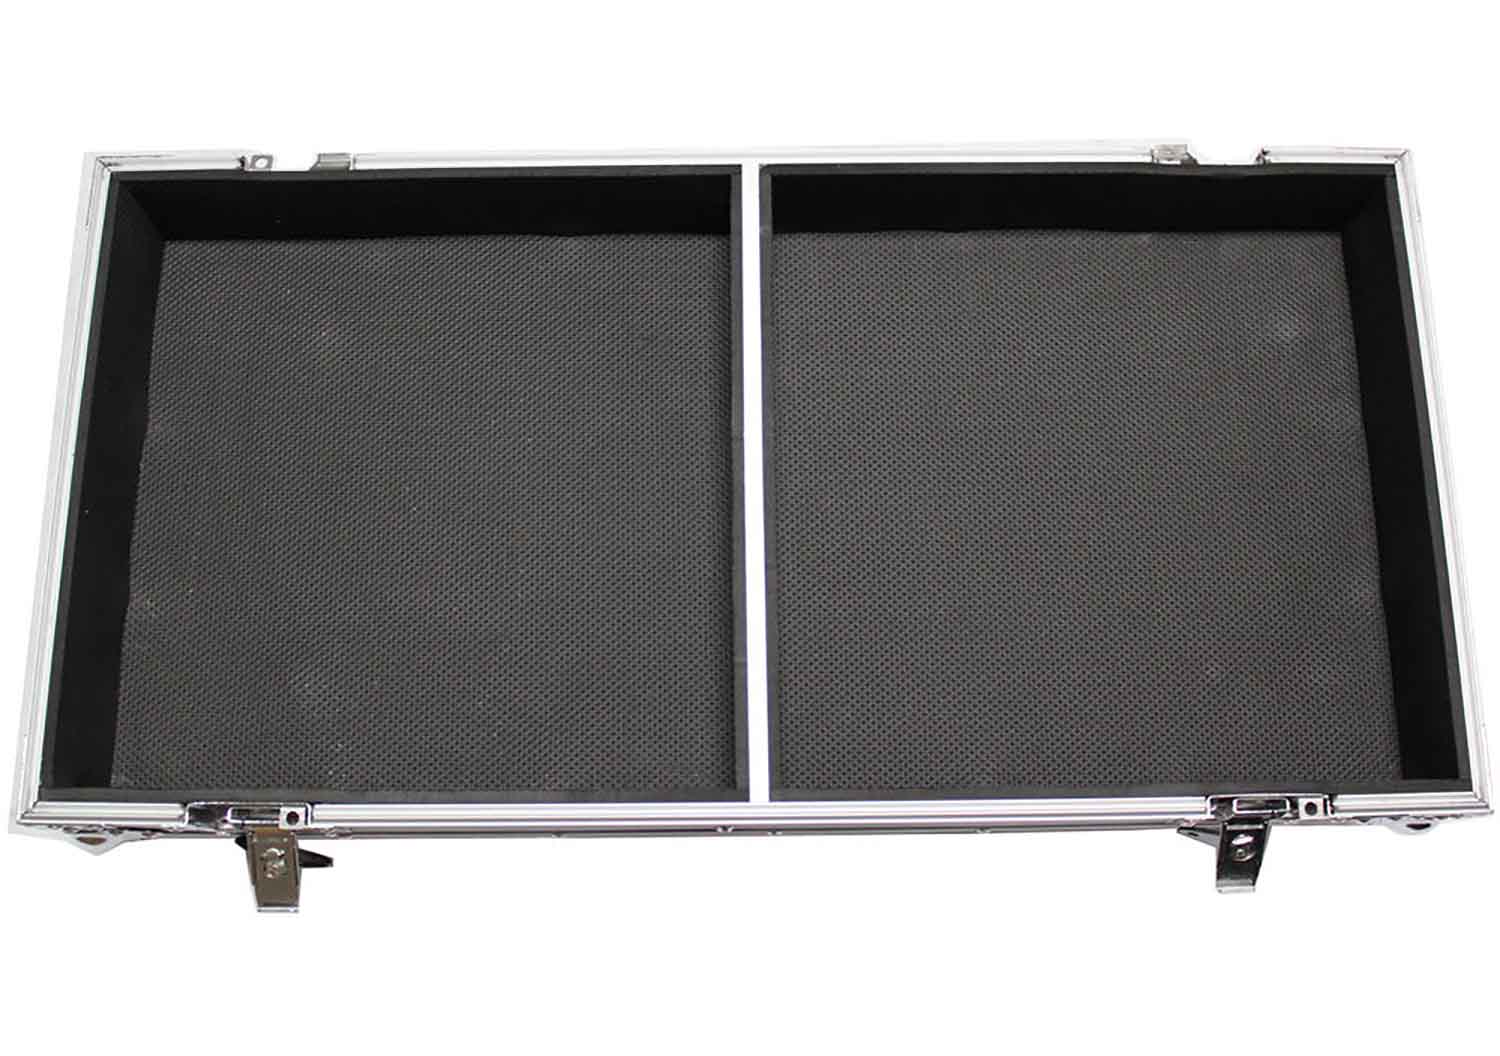 ProX X-QSC-KW122 Dual ATA Style Speaker Flight Case for QSC KW122 Speakers Holds 2 - Hollywood DJ